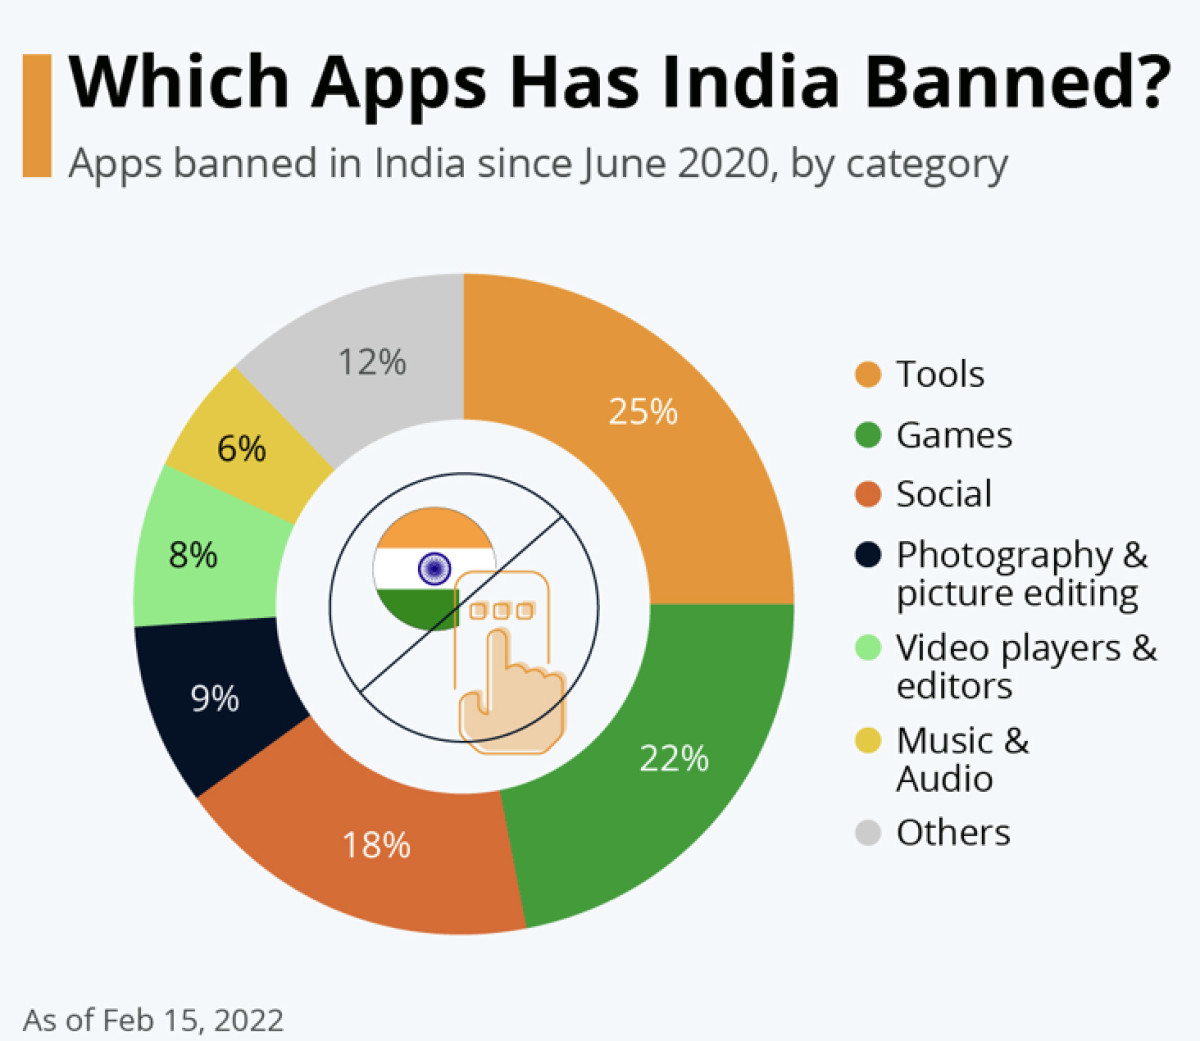 Types of apps banned in India